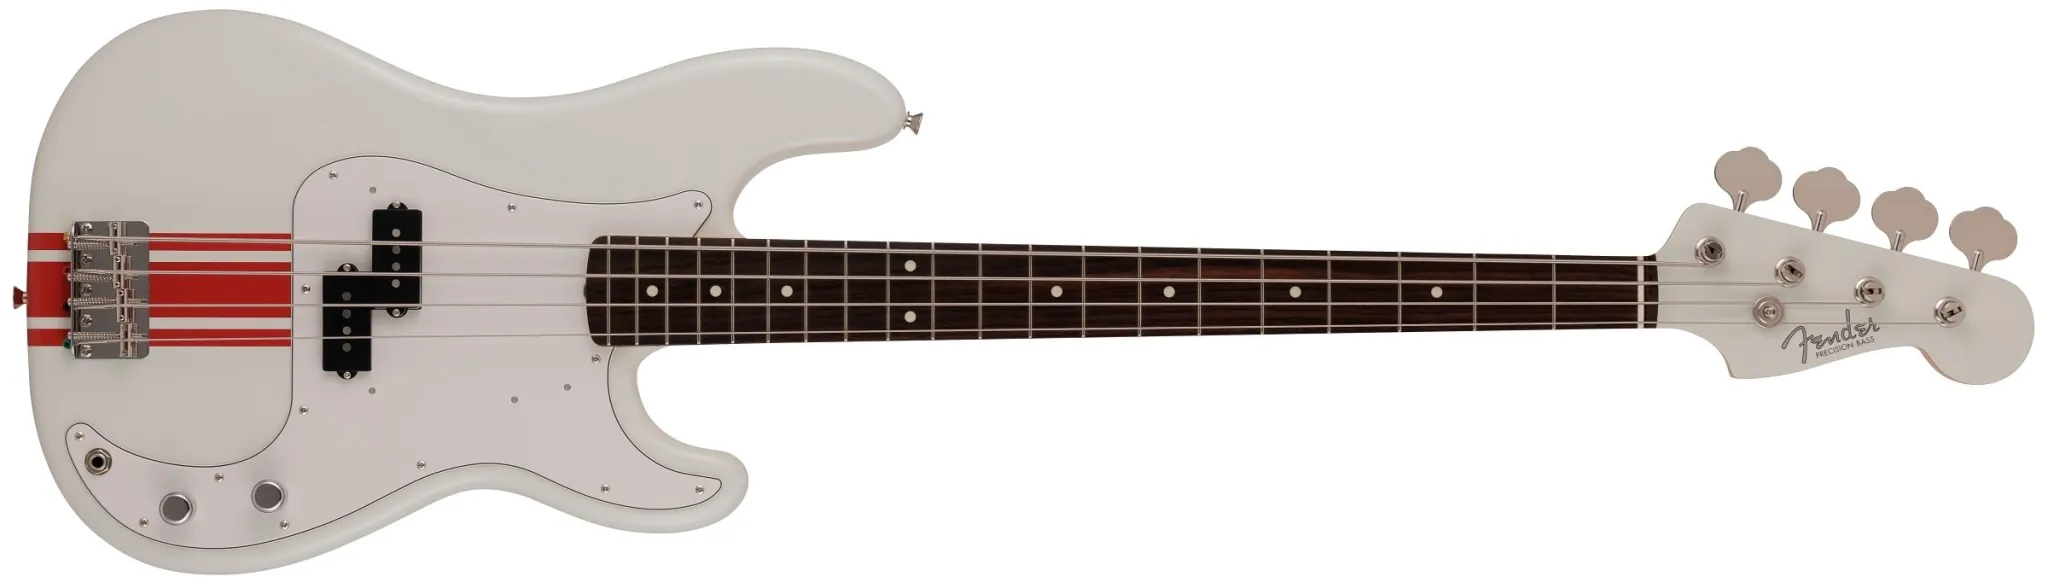 Japan Traditional 60s Precision Bass Competition Stripe